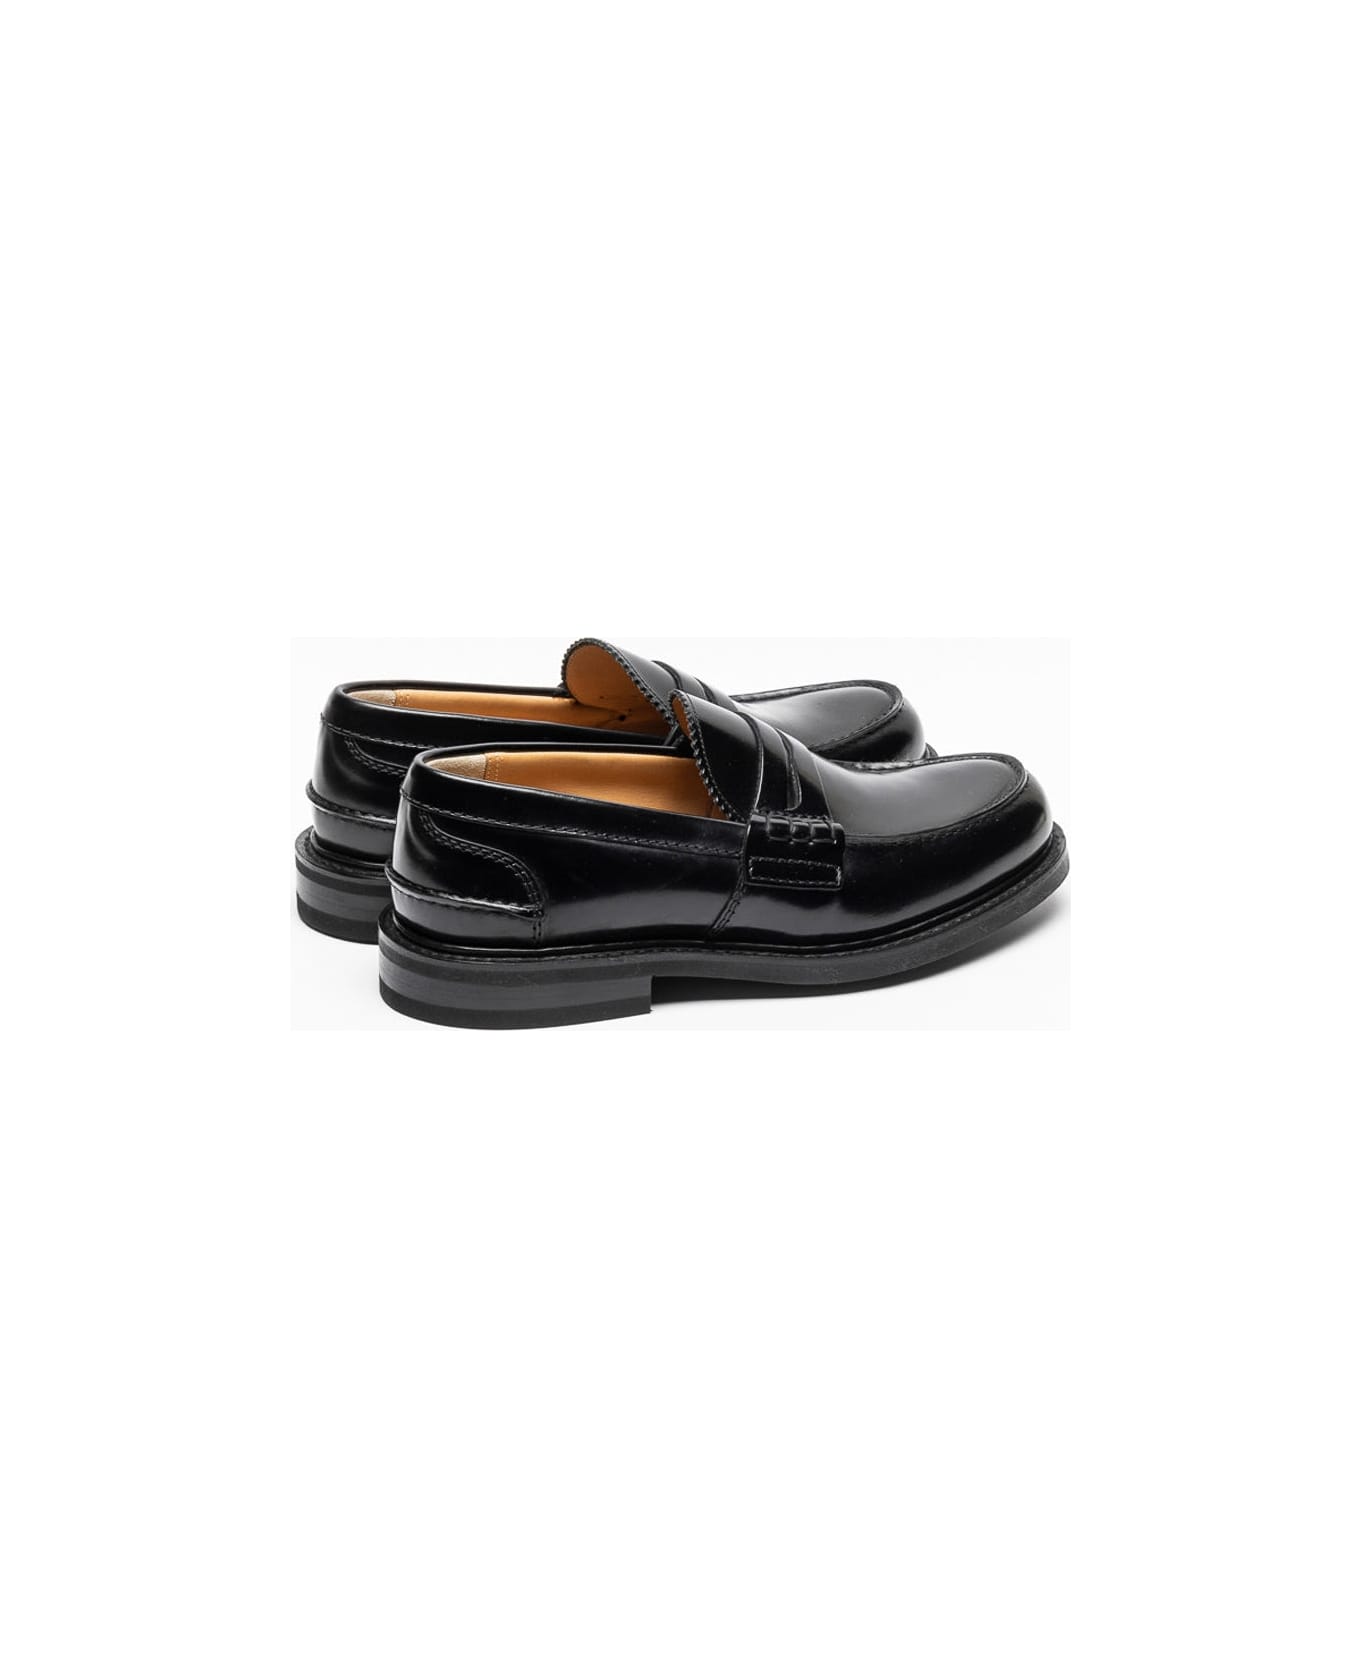 Church's Dlw Black Bookbinder Penny Loafer - Nero